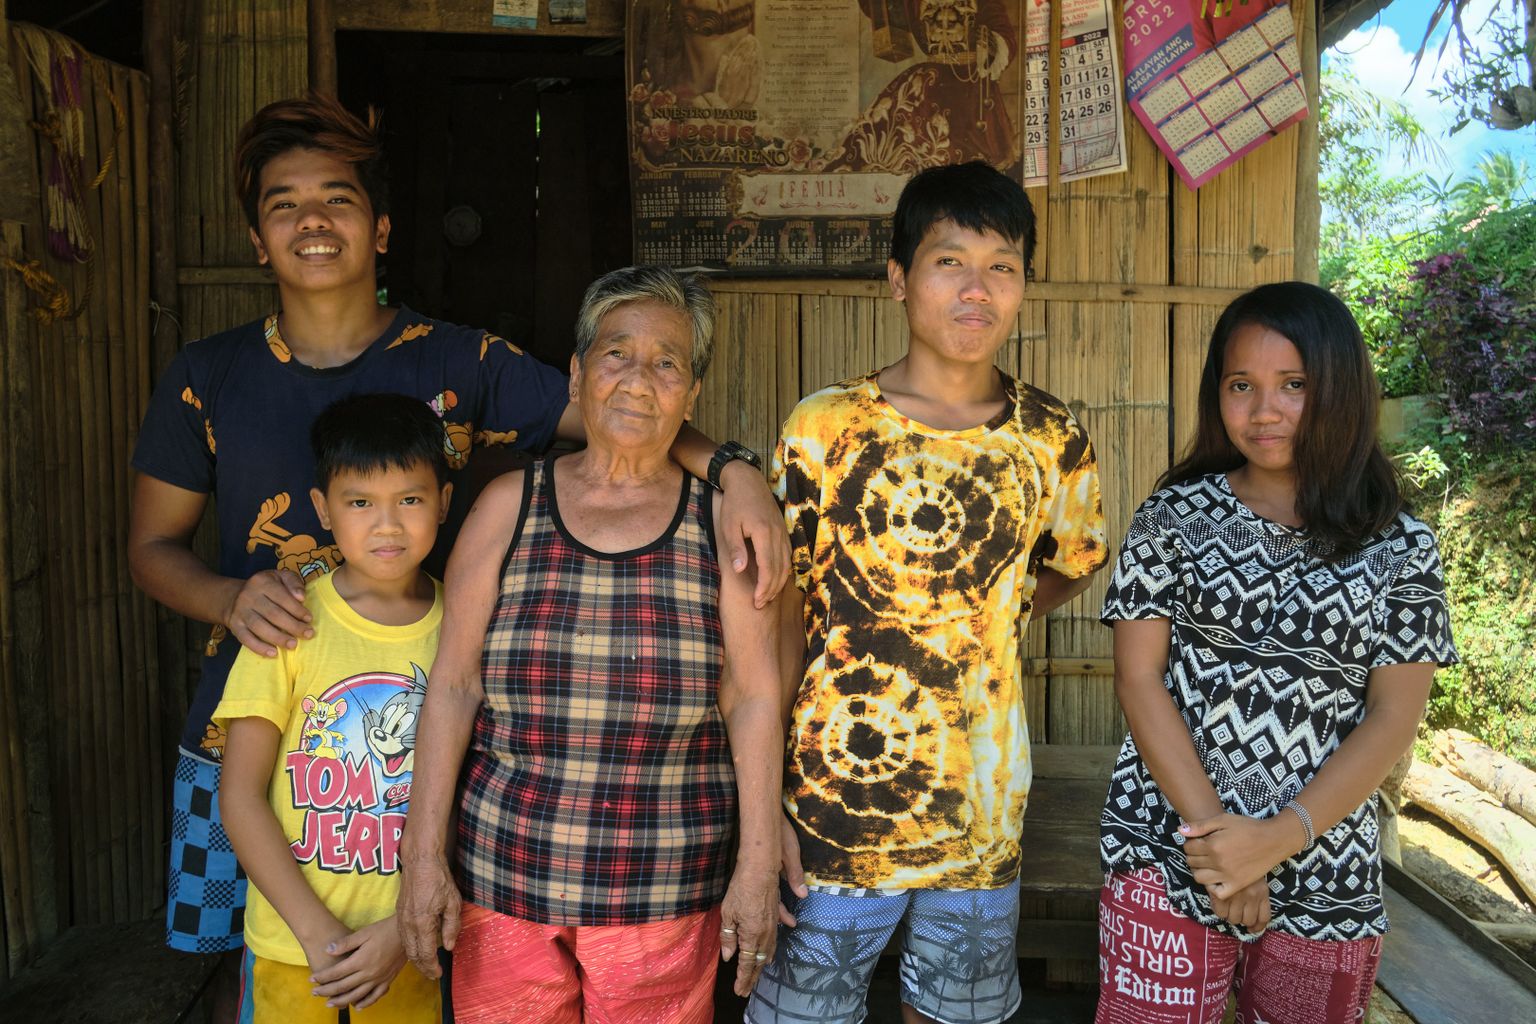 Eron poses with his family in this picture taken in his grandmother’s house. He is surrounded by his 70-year grandma, Euphemia Castro, older brother Ranel Almoguera, his sister, Rachele Almoguera, and 11-year old sibling, John Loyd Flores.